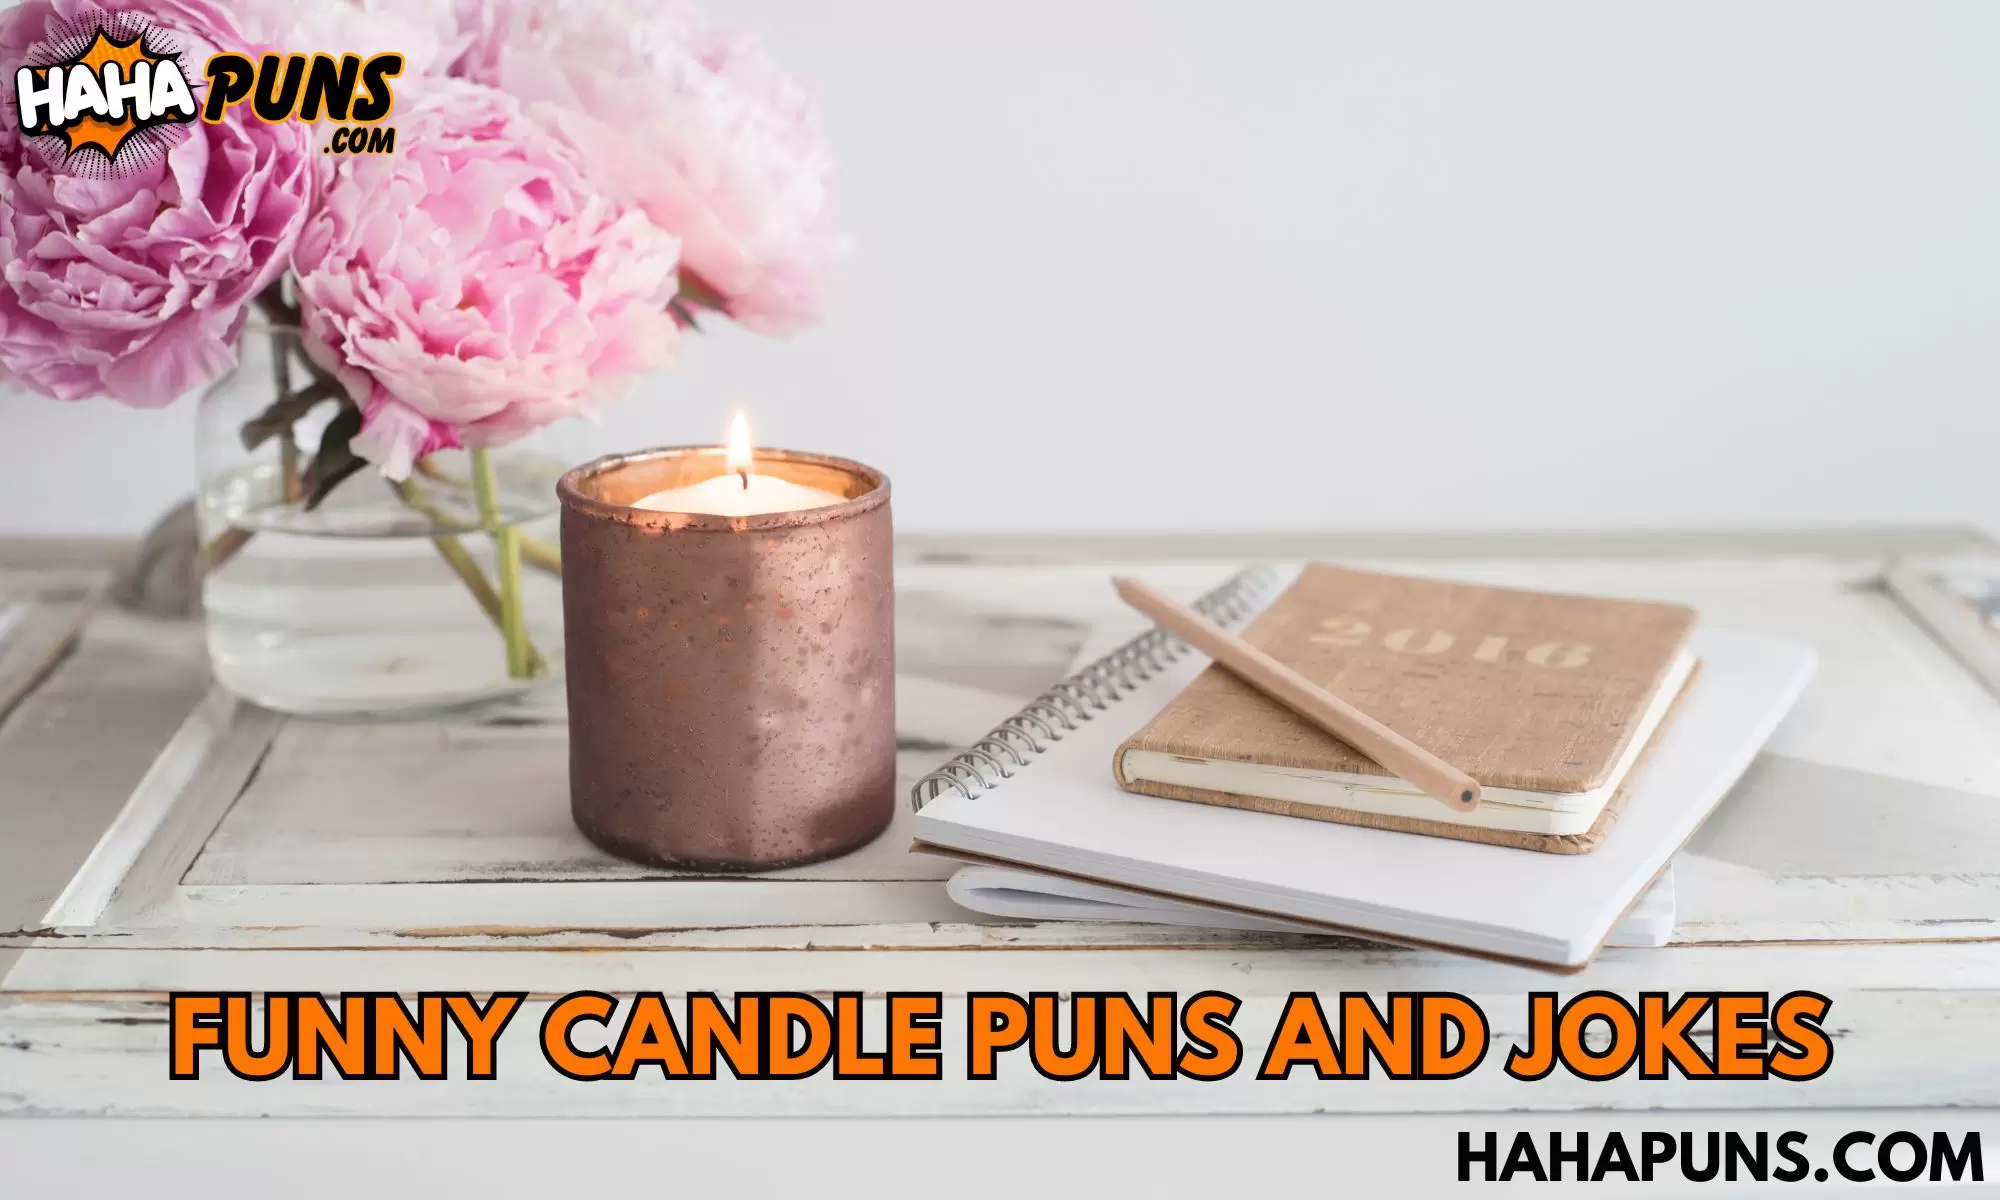 Funny Candle Puns And Jokes